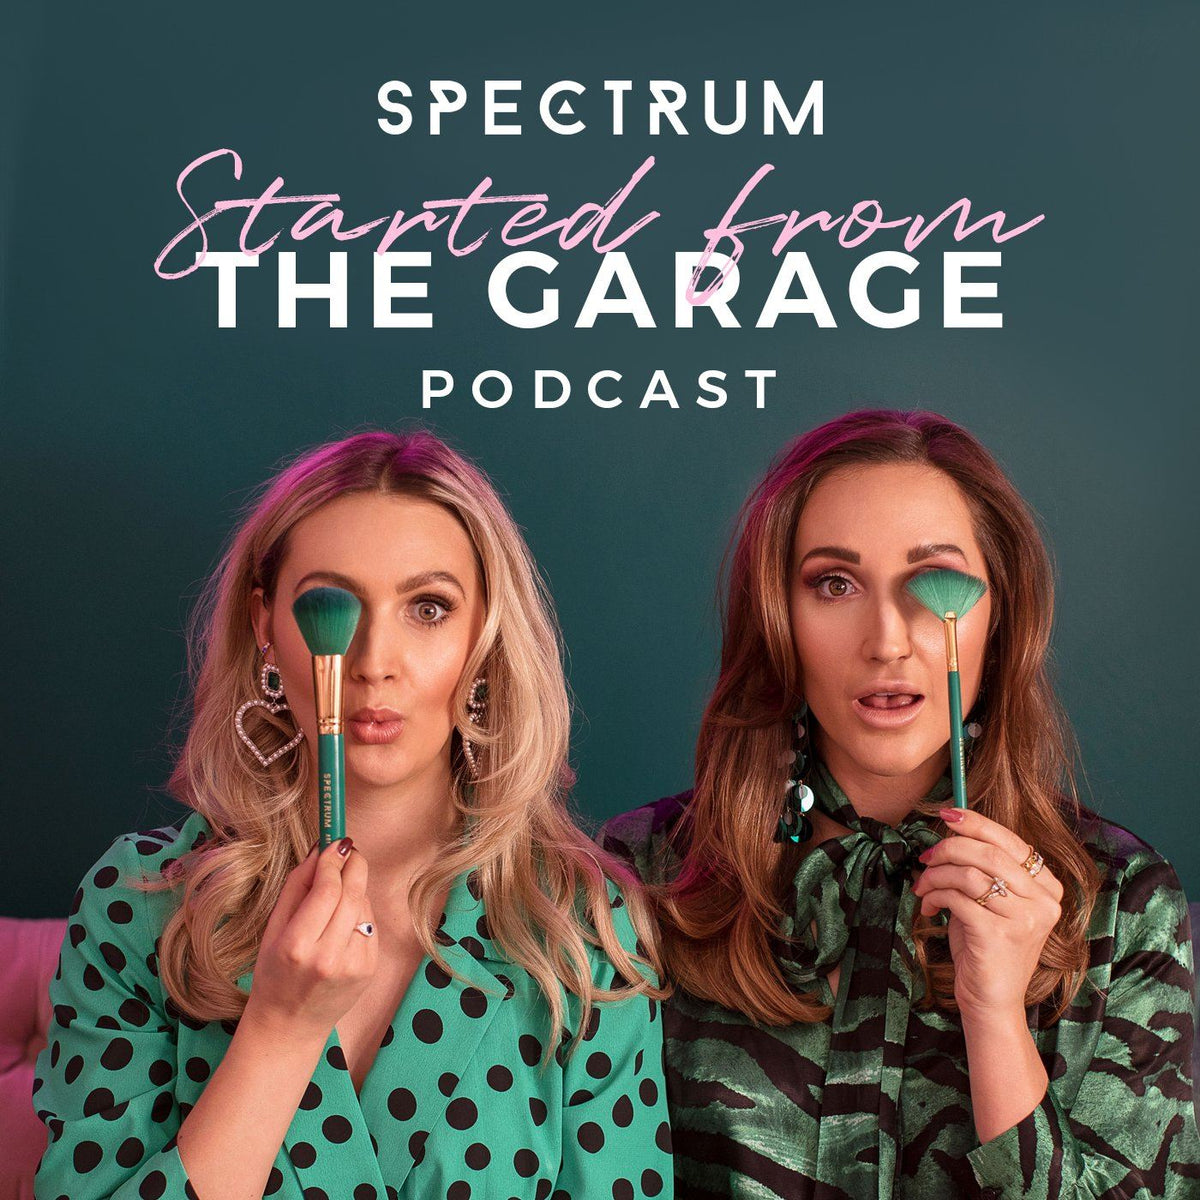 Started from the Garage Podcast - Episode 001